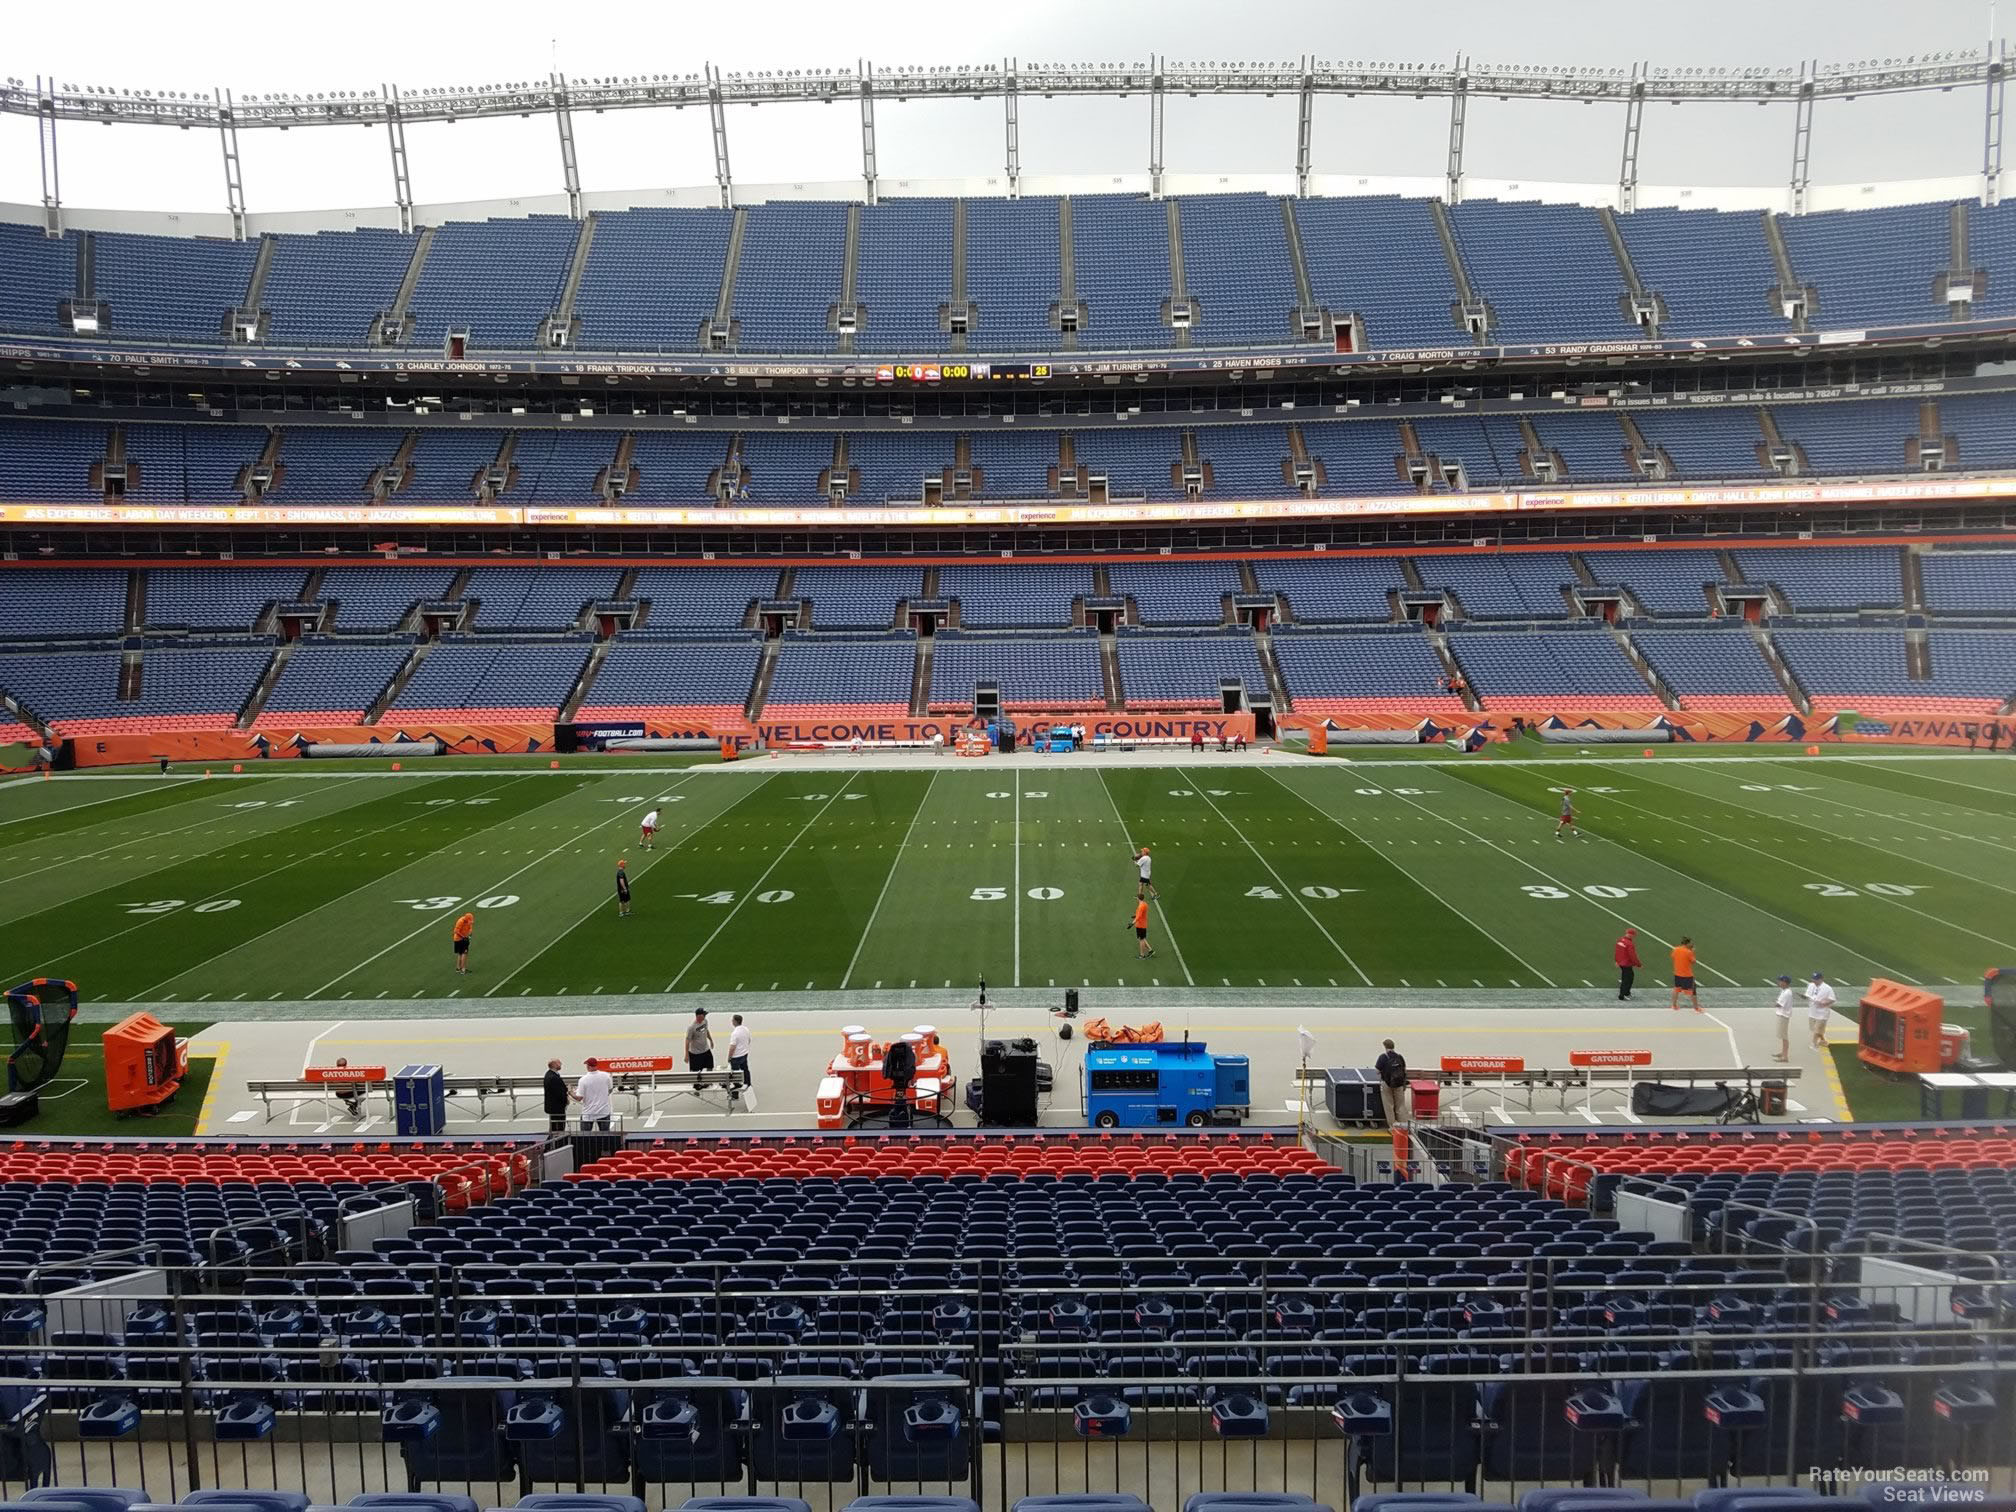 section 105, row 30 seat view  - empower field (at mile high)